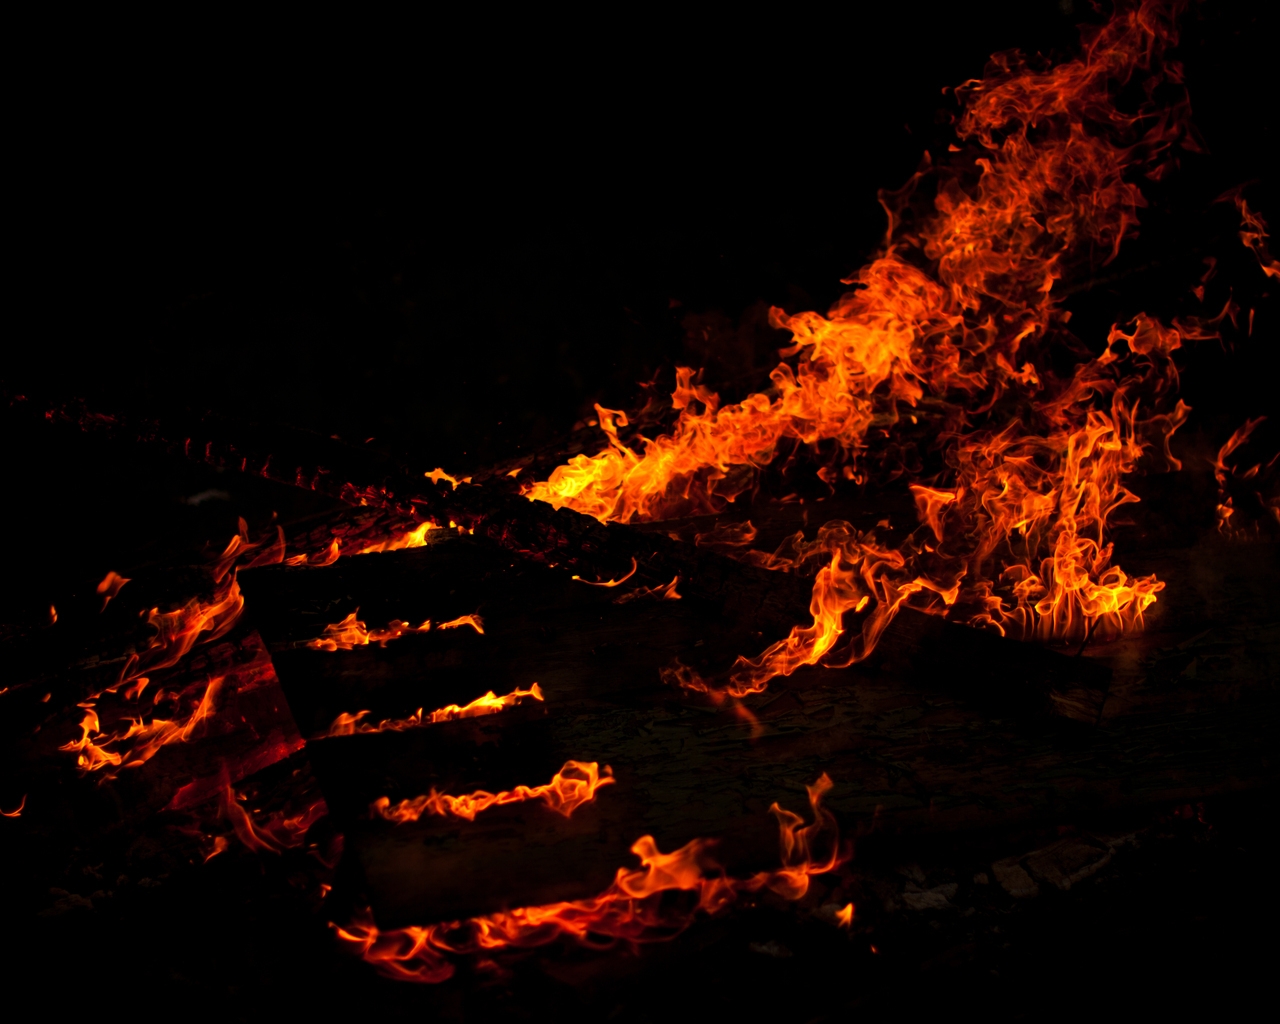 Night and Fire for 1280 x 1024 resolution